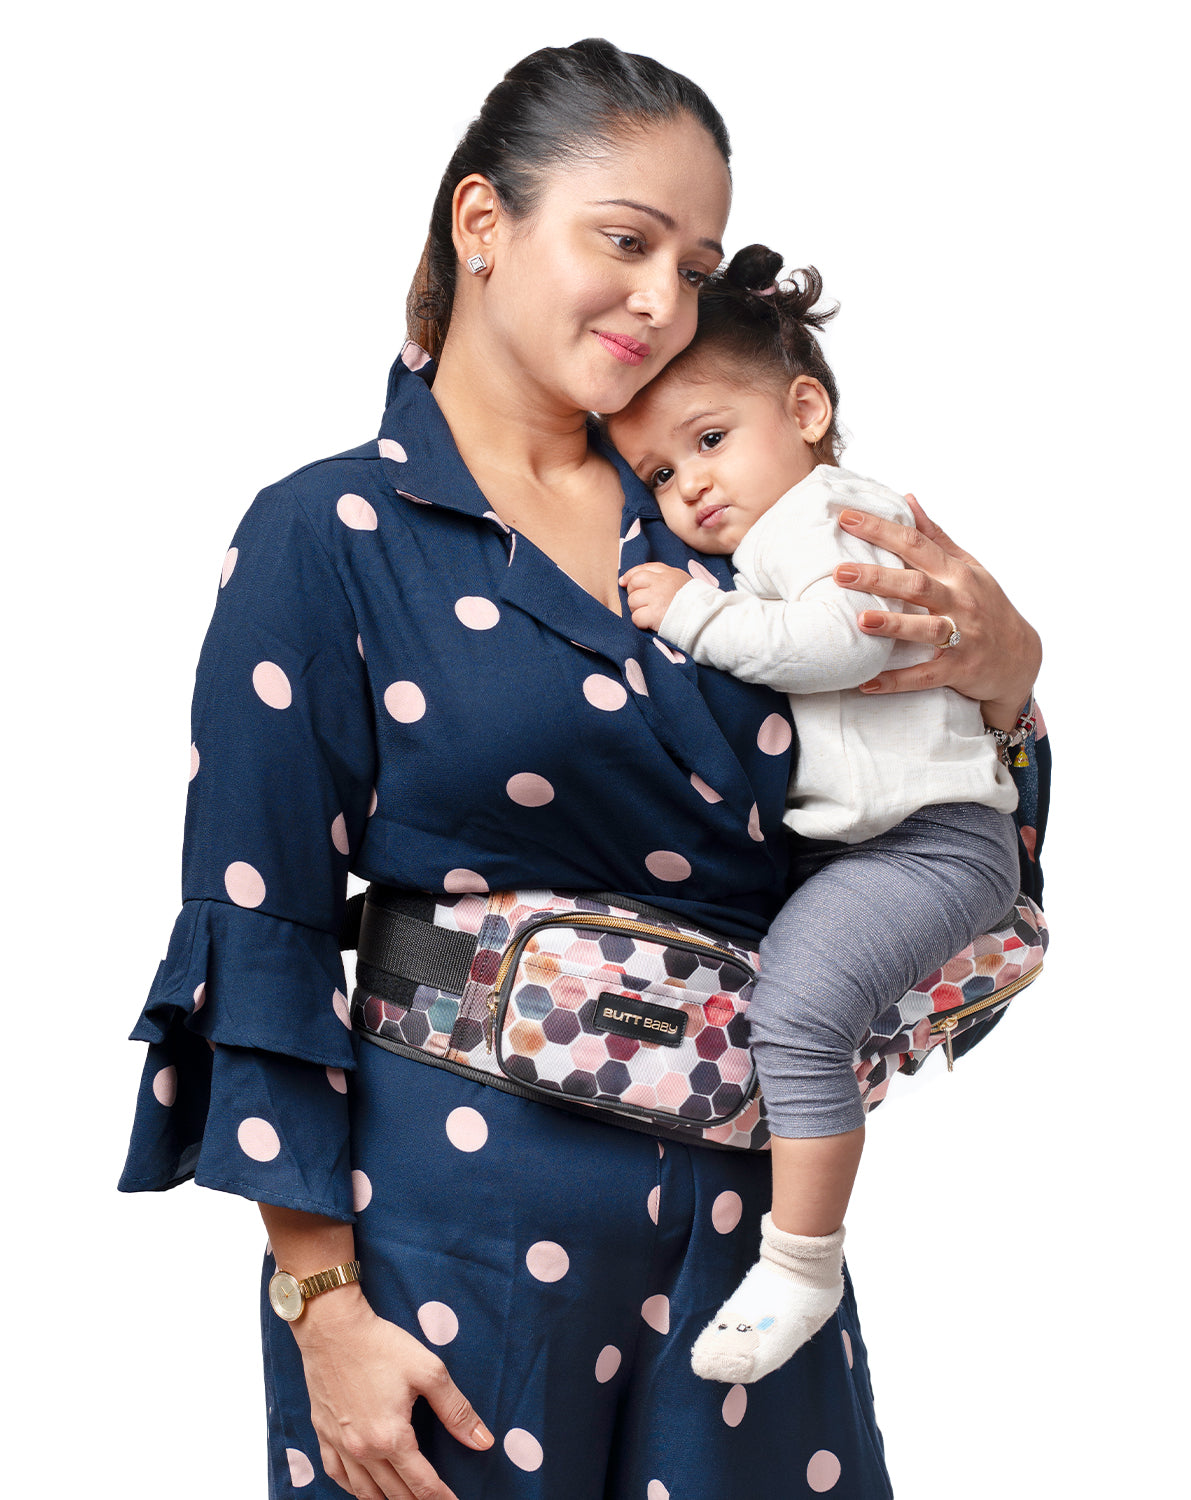 Honeycomb Toddler Carry Sling